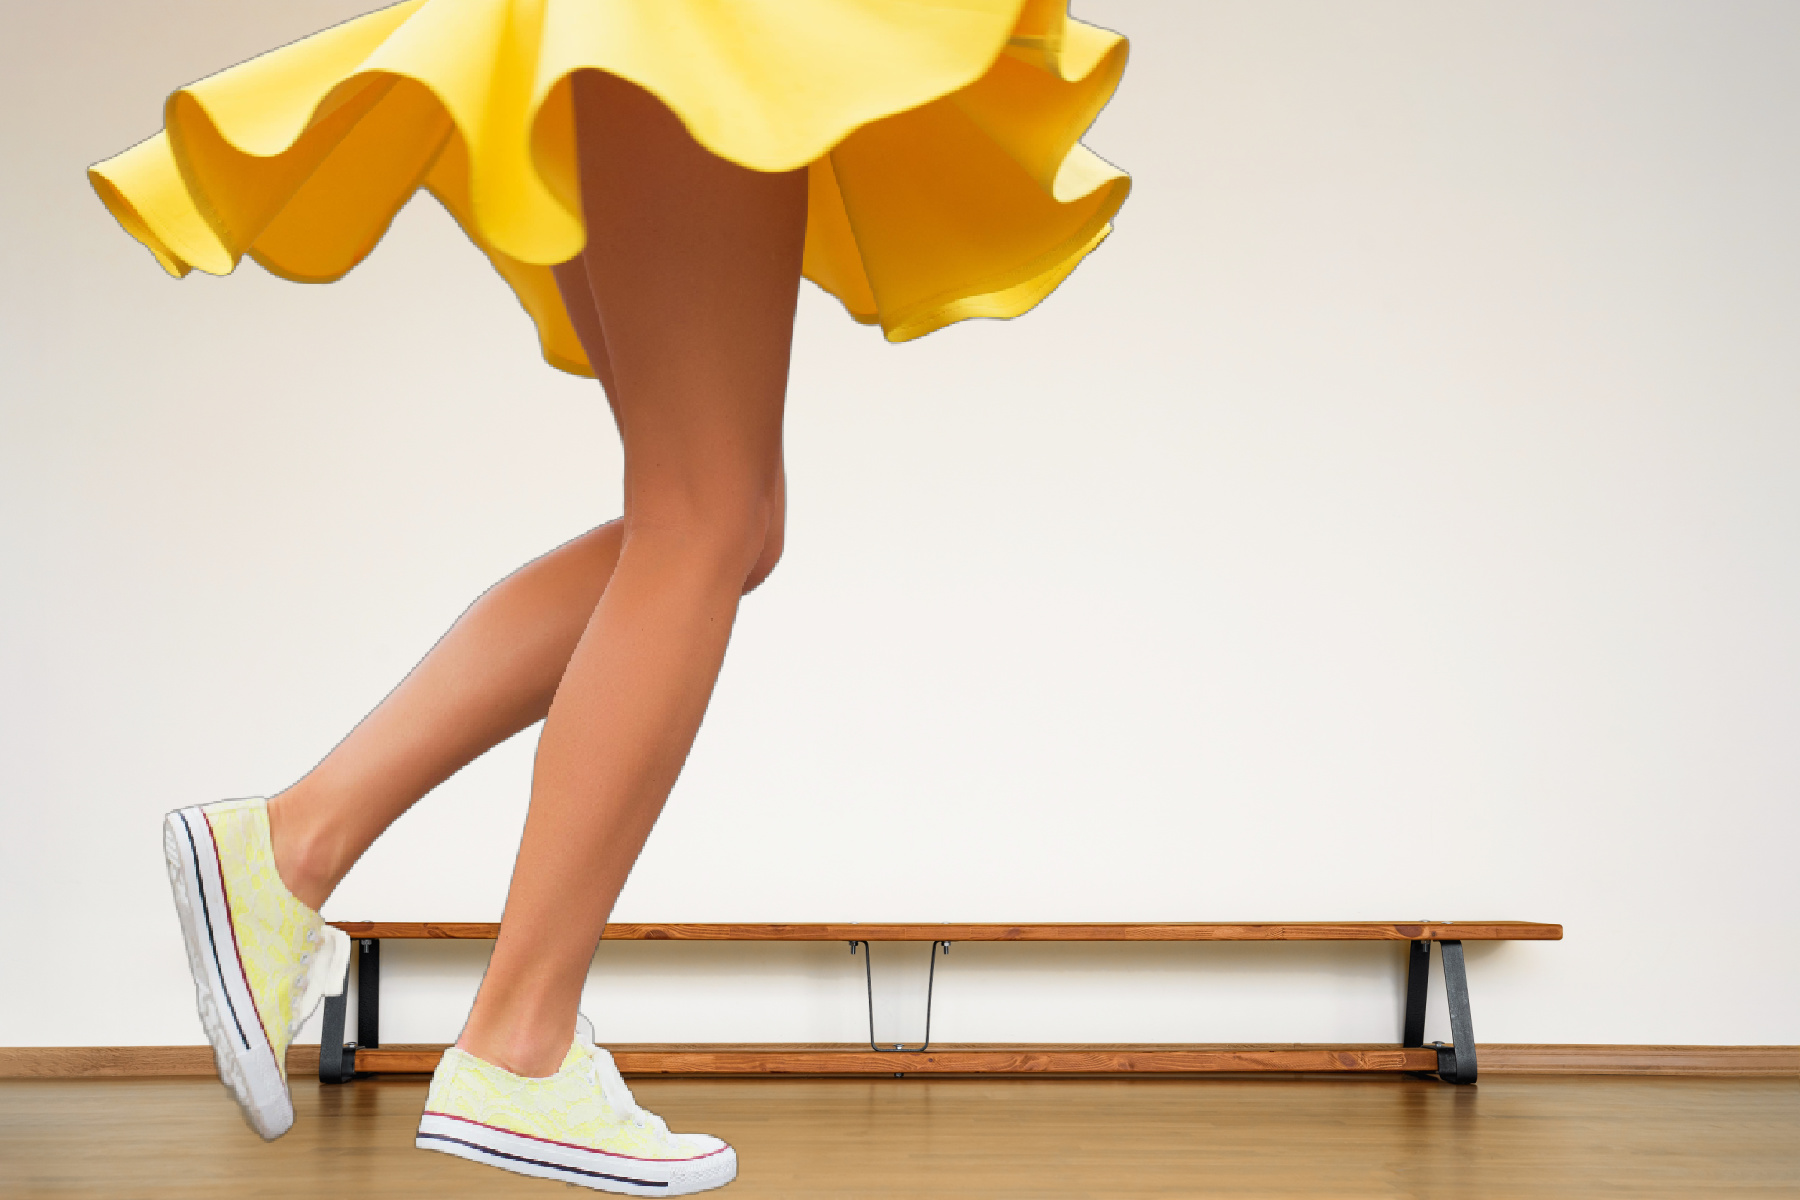 Girl in yellow dress wearing sneakers waist down only. (Istock photo licensed to The Zebra Press)